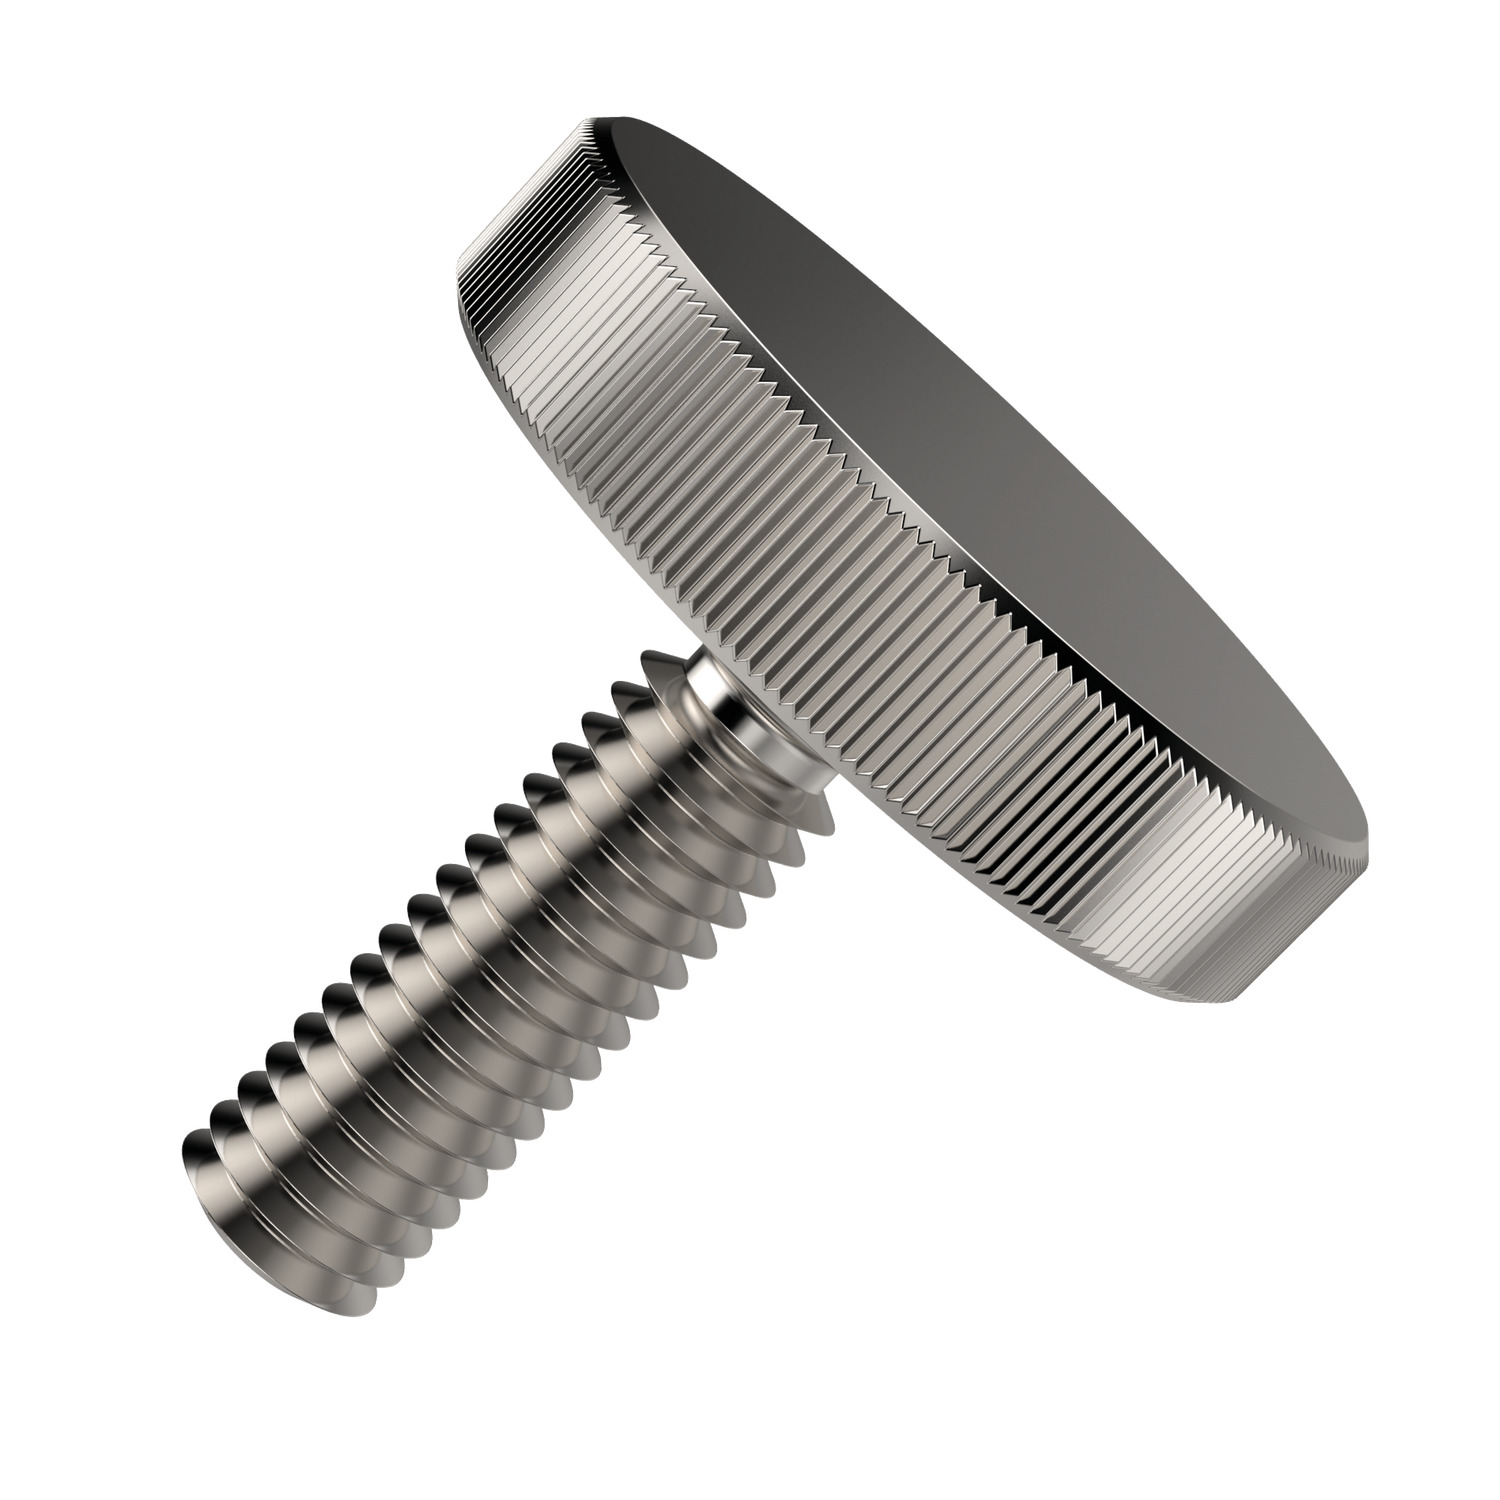 Product 37040, Flat Knurled Thumb Screws stainless steel / 